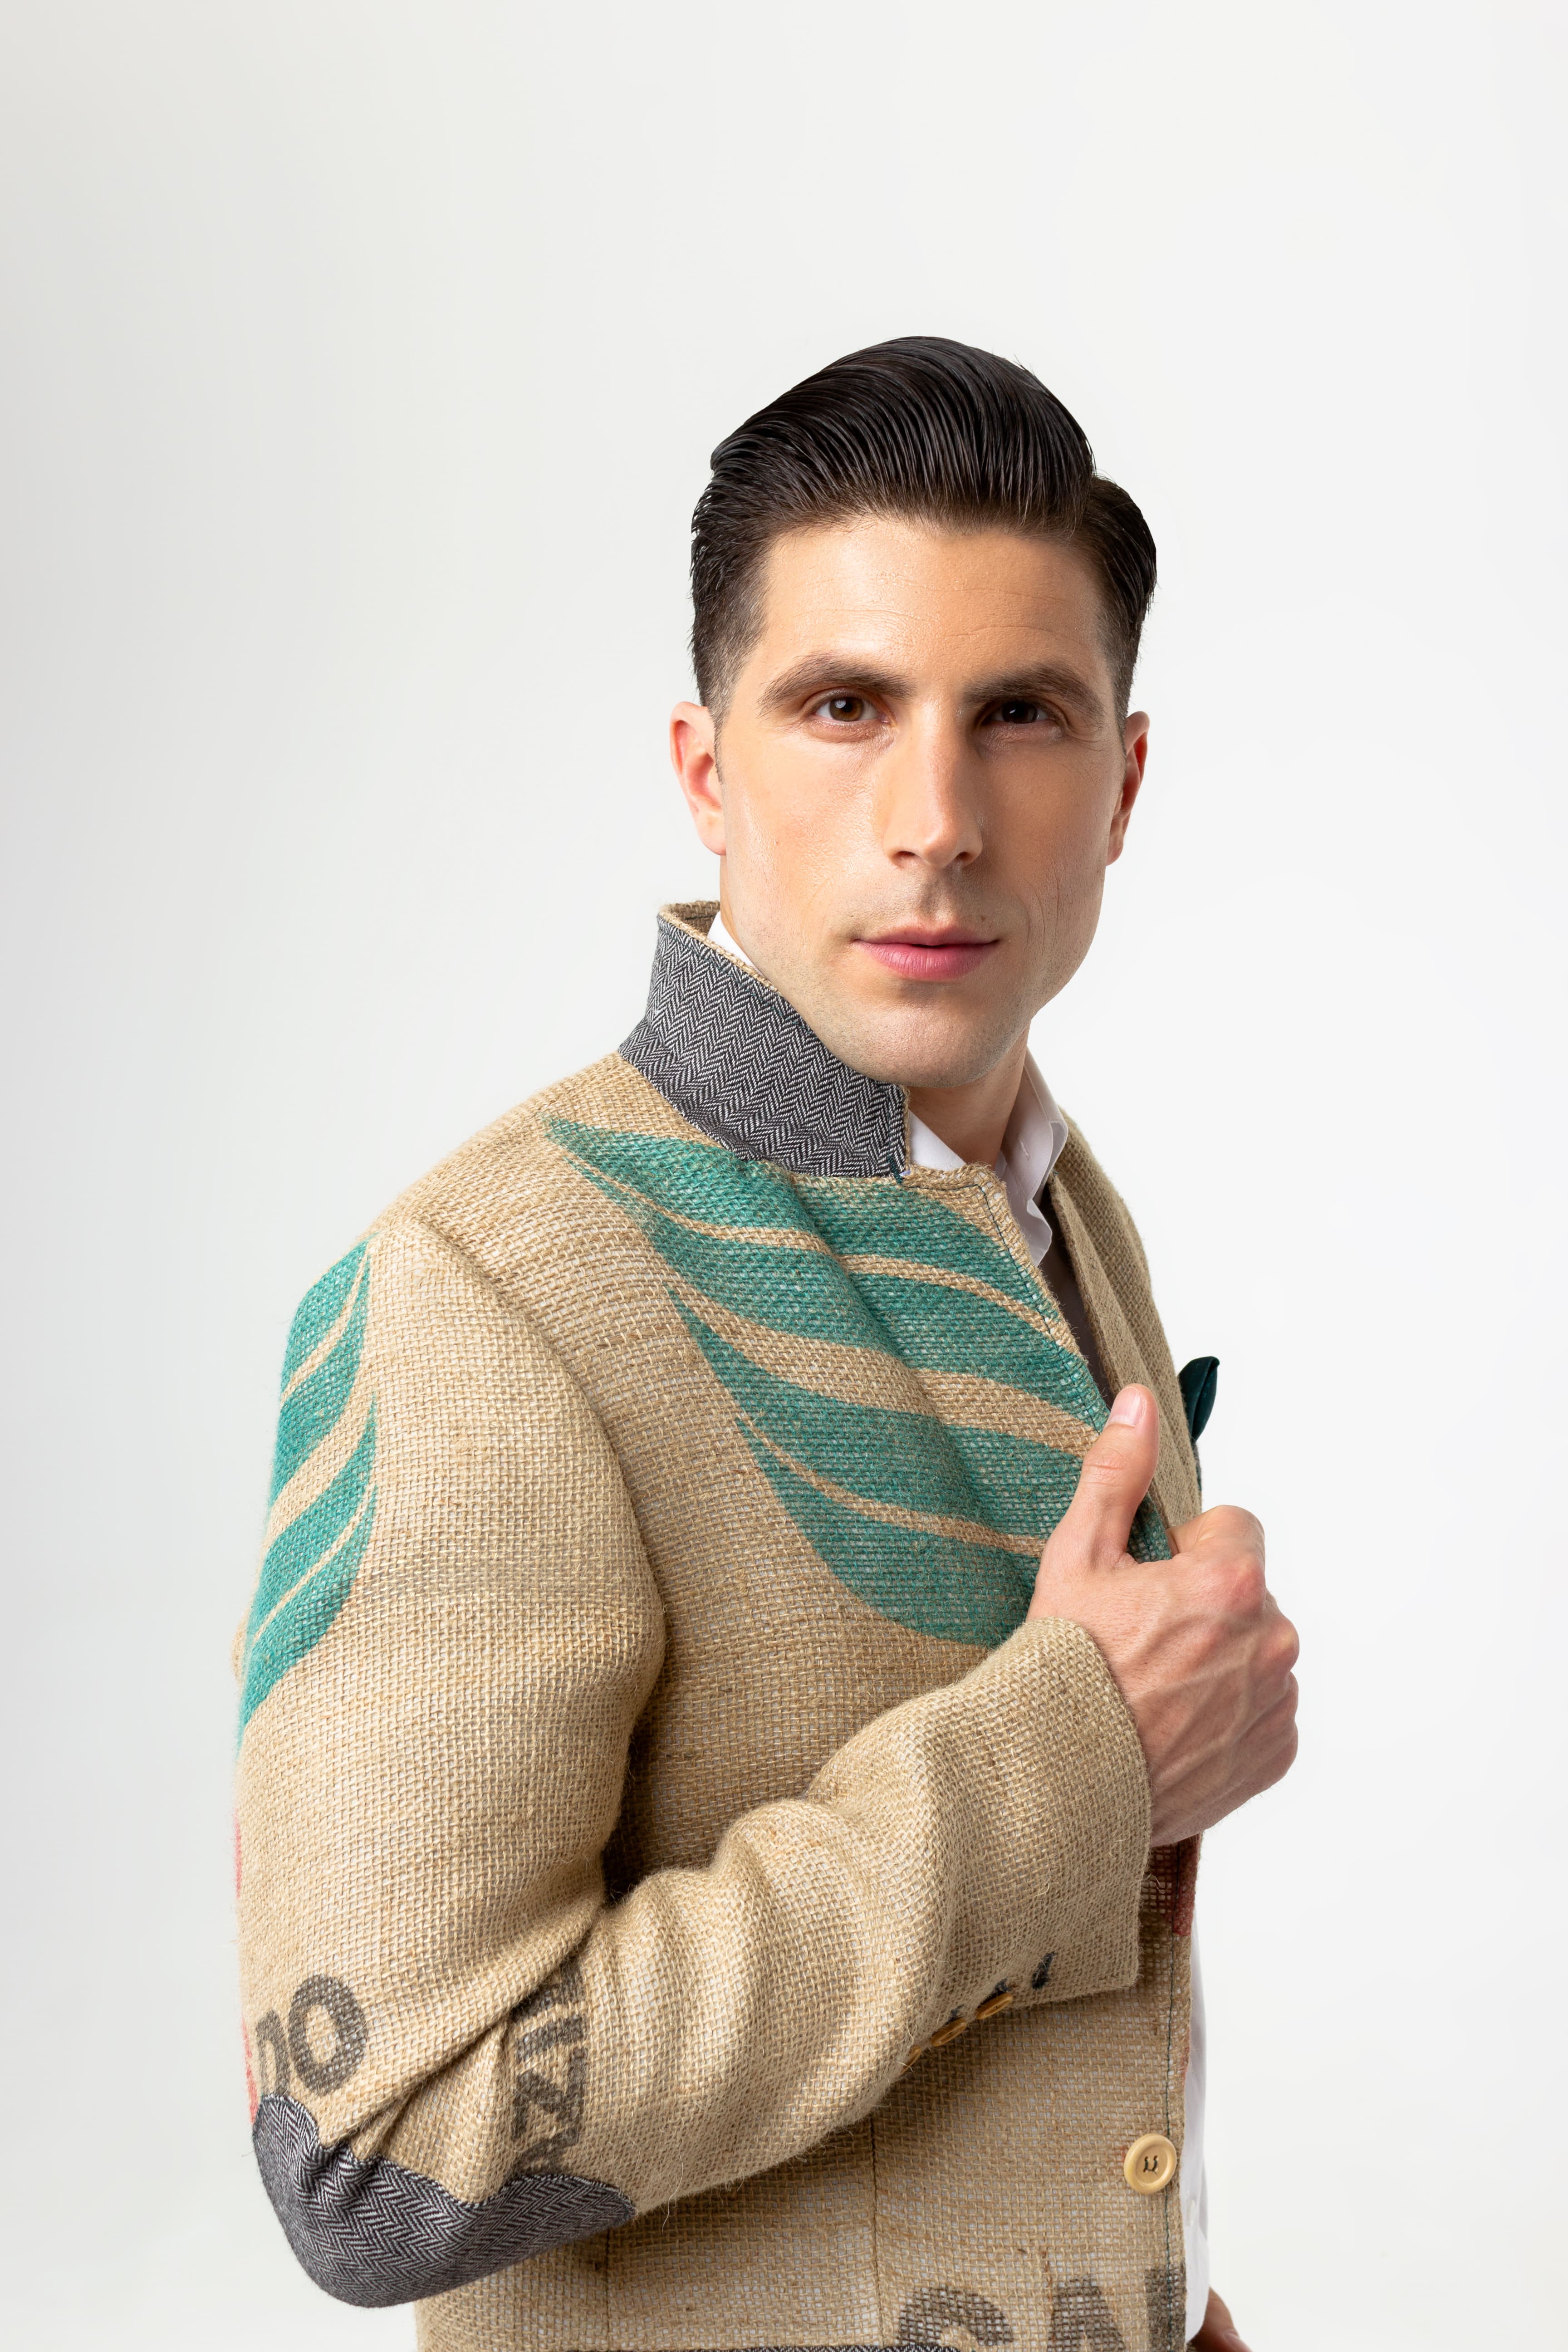 Original design of an environmentally friendly sports jacket for men from upcycled coffee bags